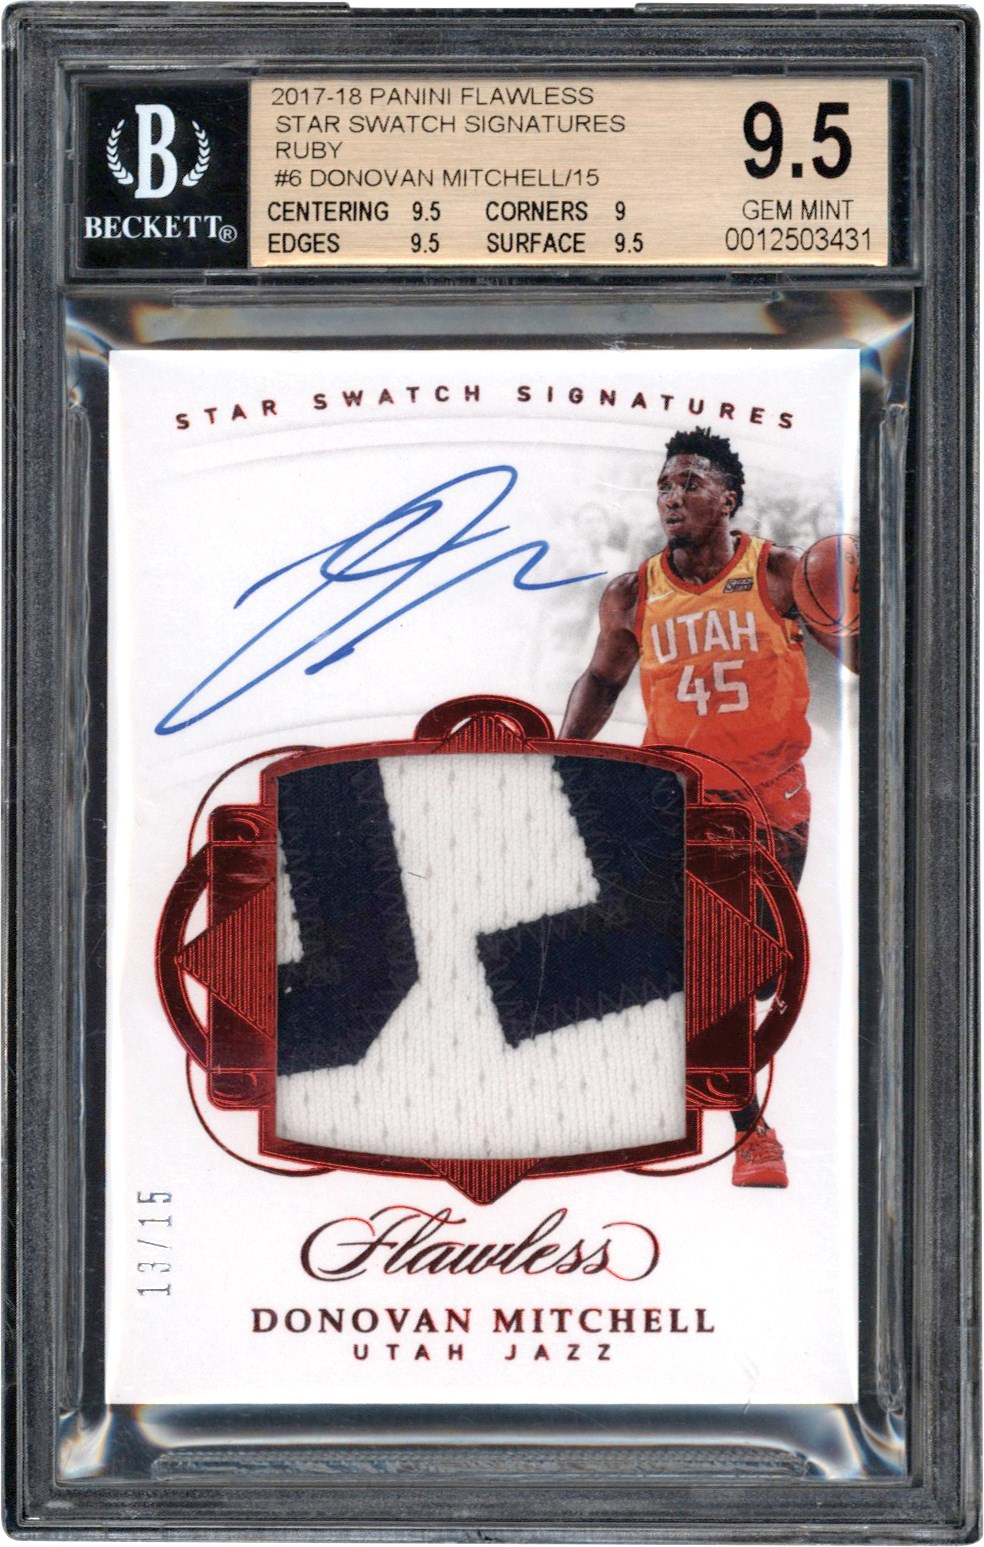 - 2017-2018 Panini Flawless Basketball Star Swatch Signatures Ruby #6 Donovan Mitchell Game Used RPA Card #13/15 BGS GEM MINT 9.5 Auto 10